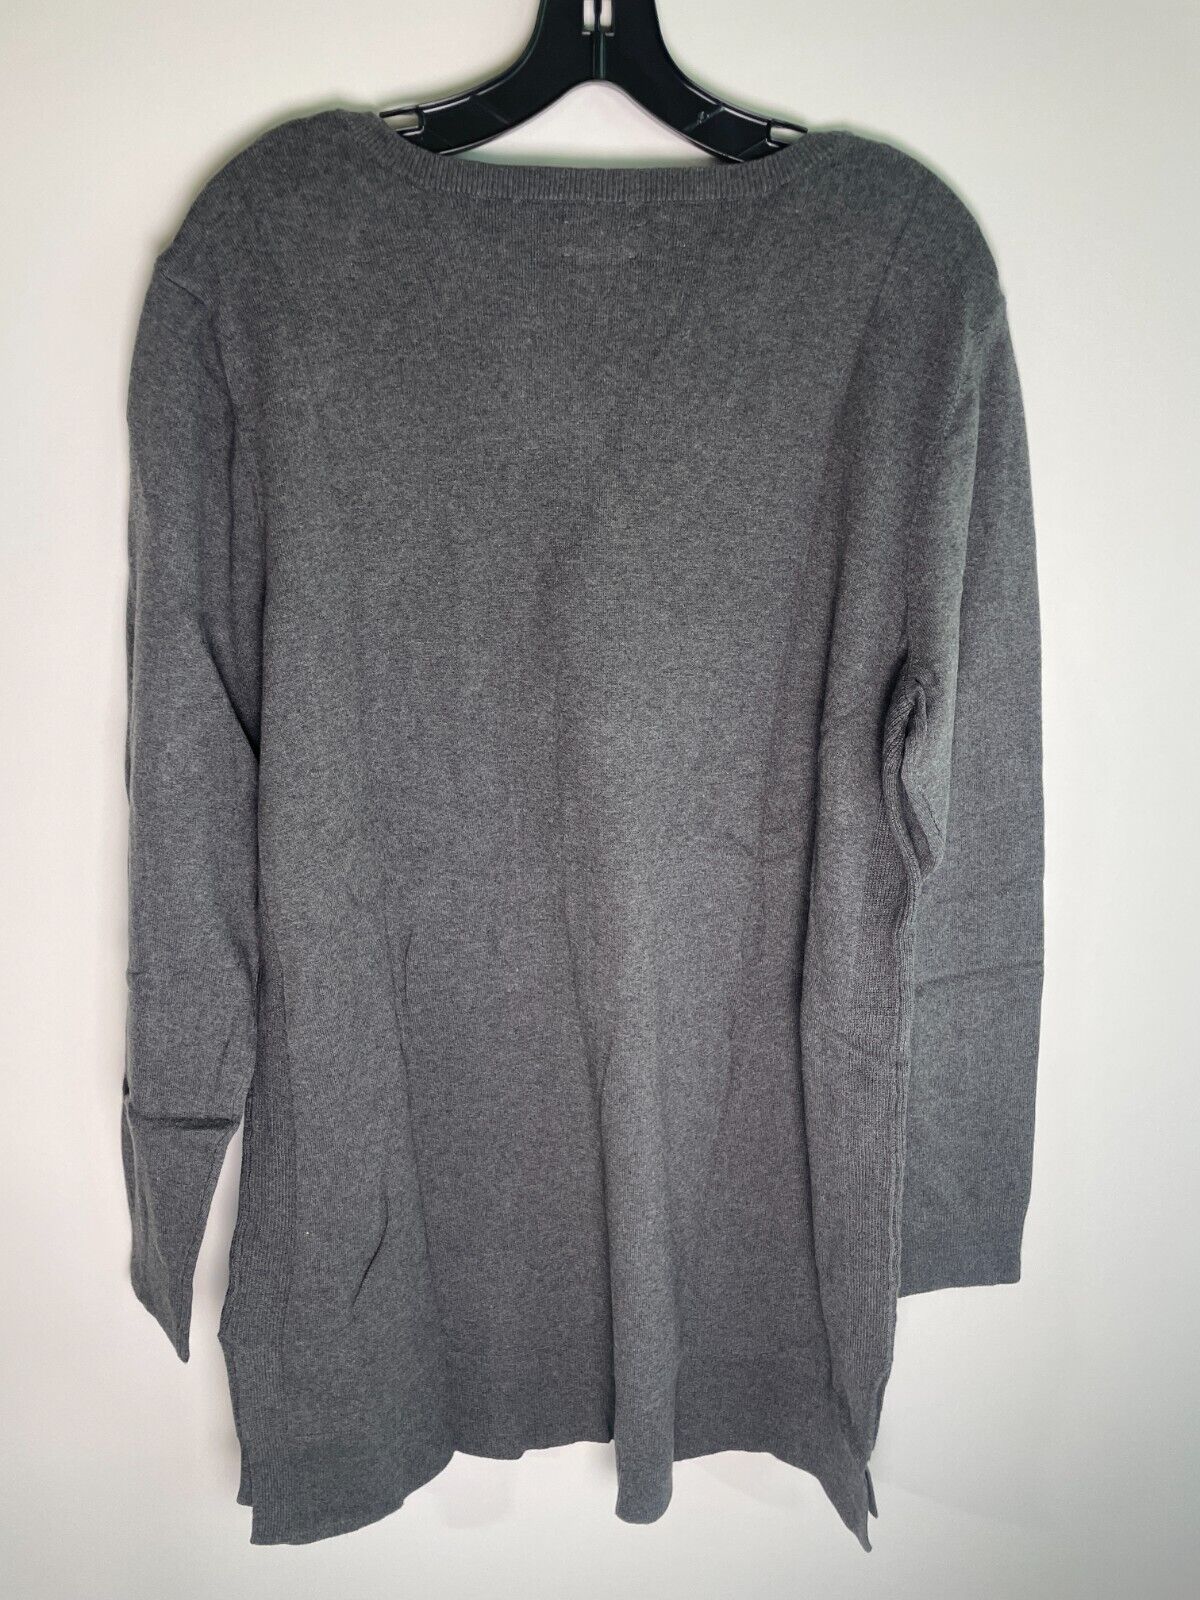 Duluth Trading Co Women's XL Shiftless V-Neck Tunic Sweater Gray 80552 WLH